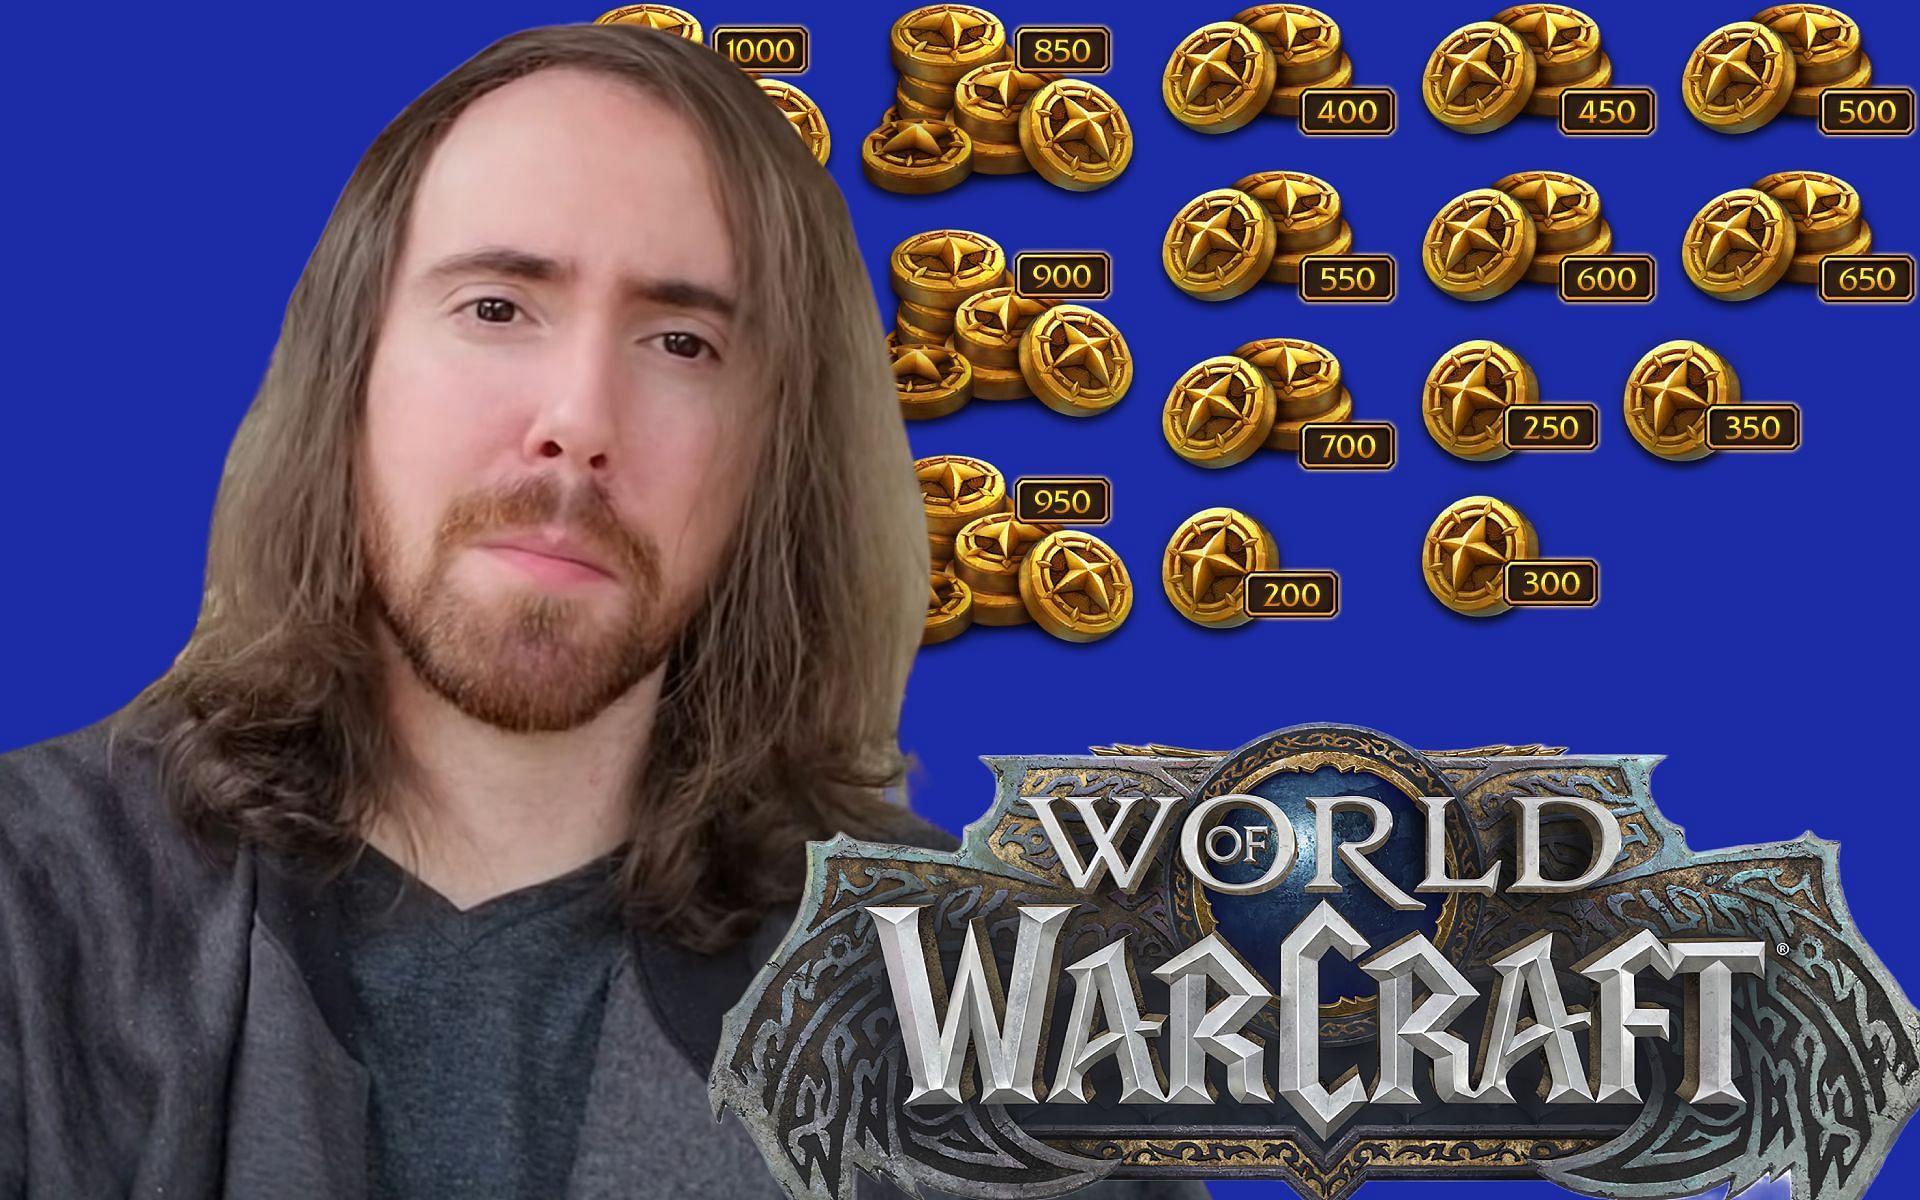 Asmongold reacts to new microtransaction in WoW (Image via Sportskeeda)